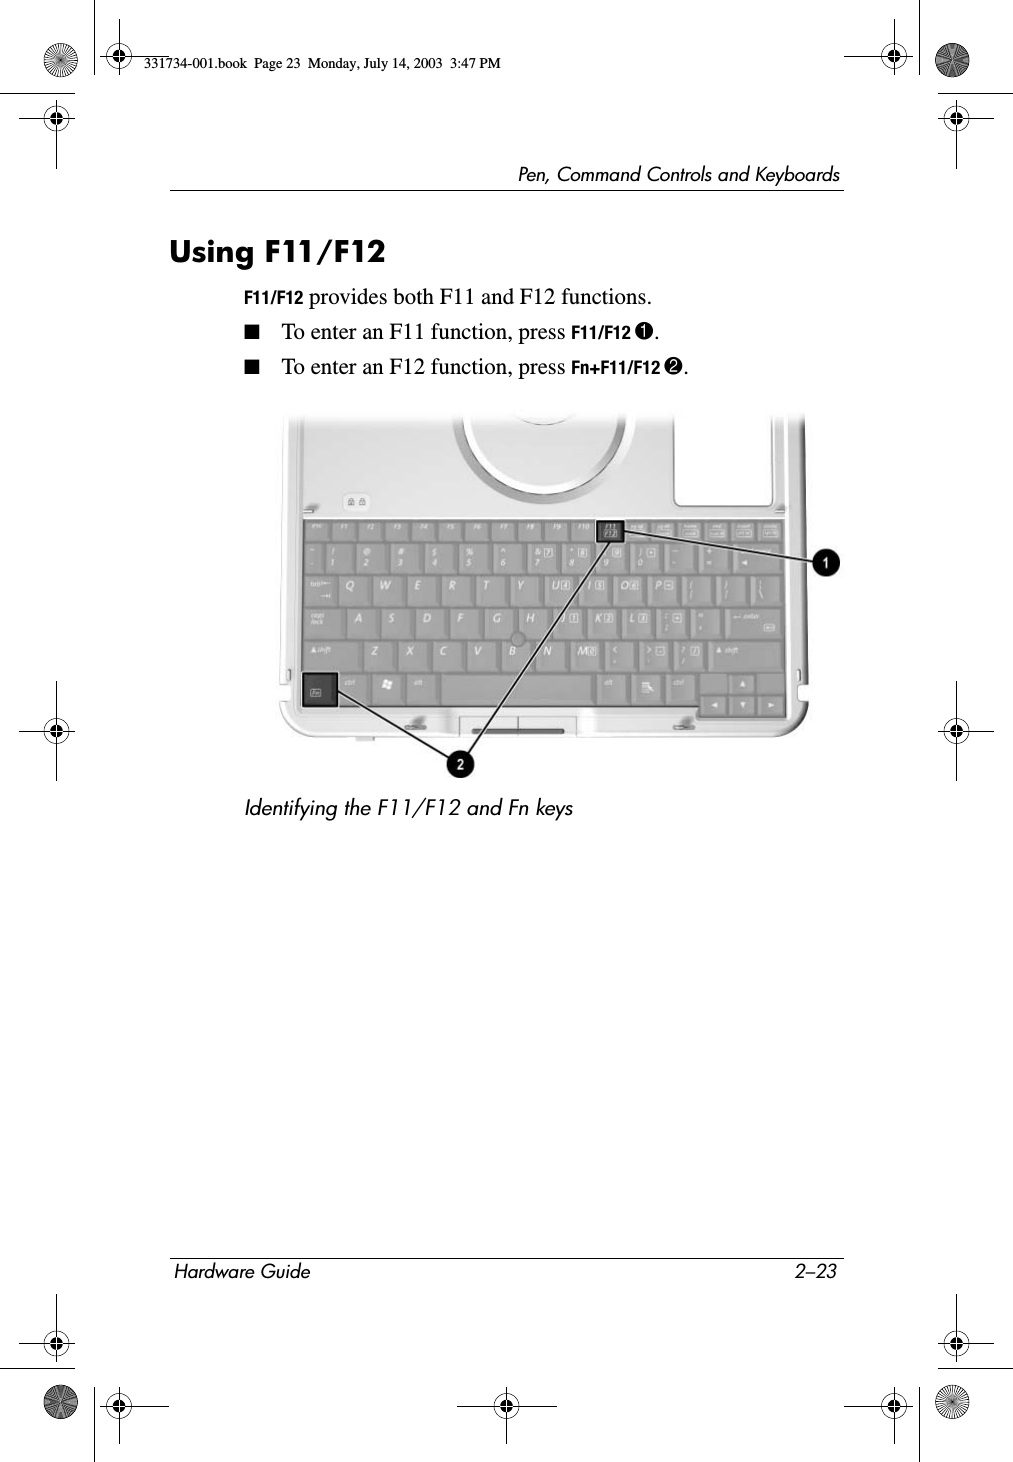 Pen, Command Controls and KeyboardsHardware Guide 2–23Using F11/F12 F11/F12 provides both F11 and F12 functions.■To enter an F11 function, press F11/F12 1.■To enter an F12 function, press Fn+F11/F12 2.Identifying the F11/F12 and Fn keys331734-001.book  Page 23  Monday, July 14, 2003  3:47 PM